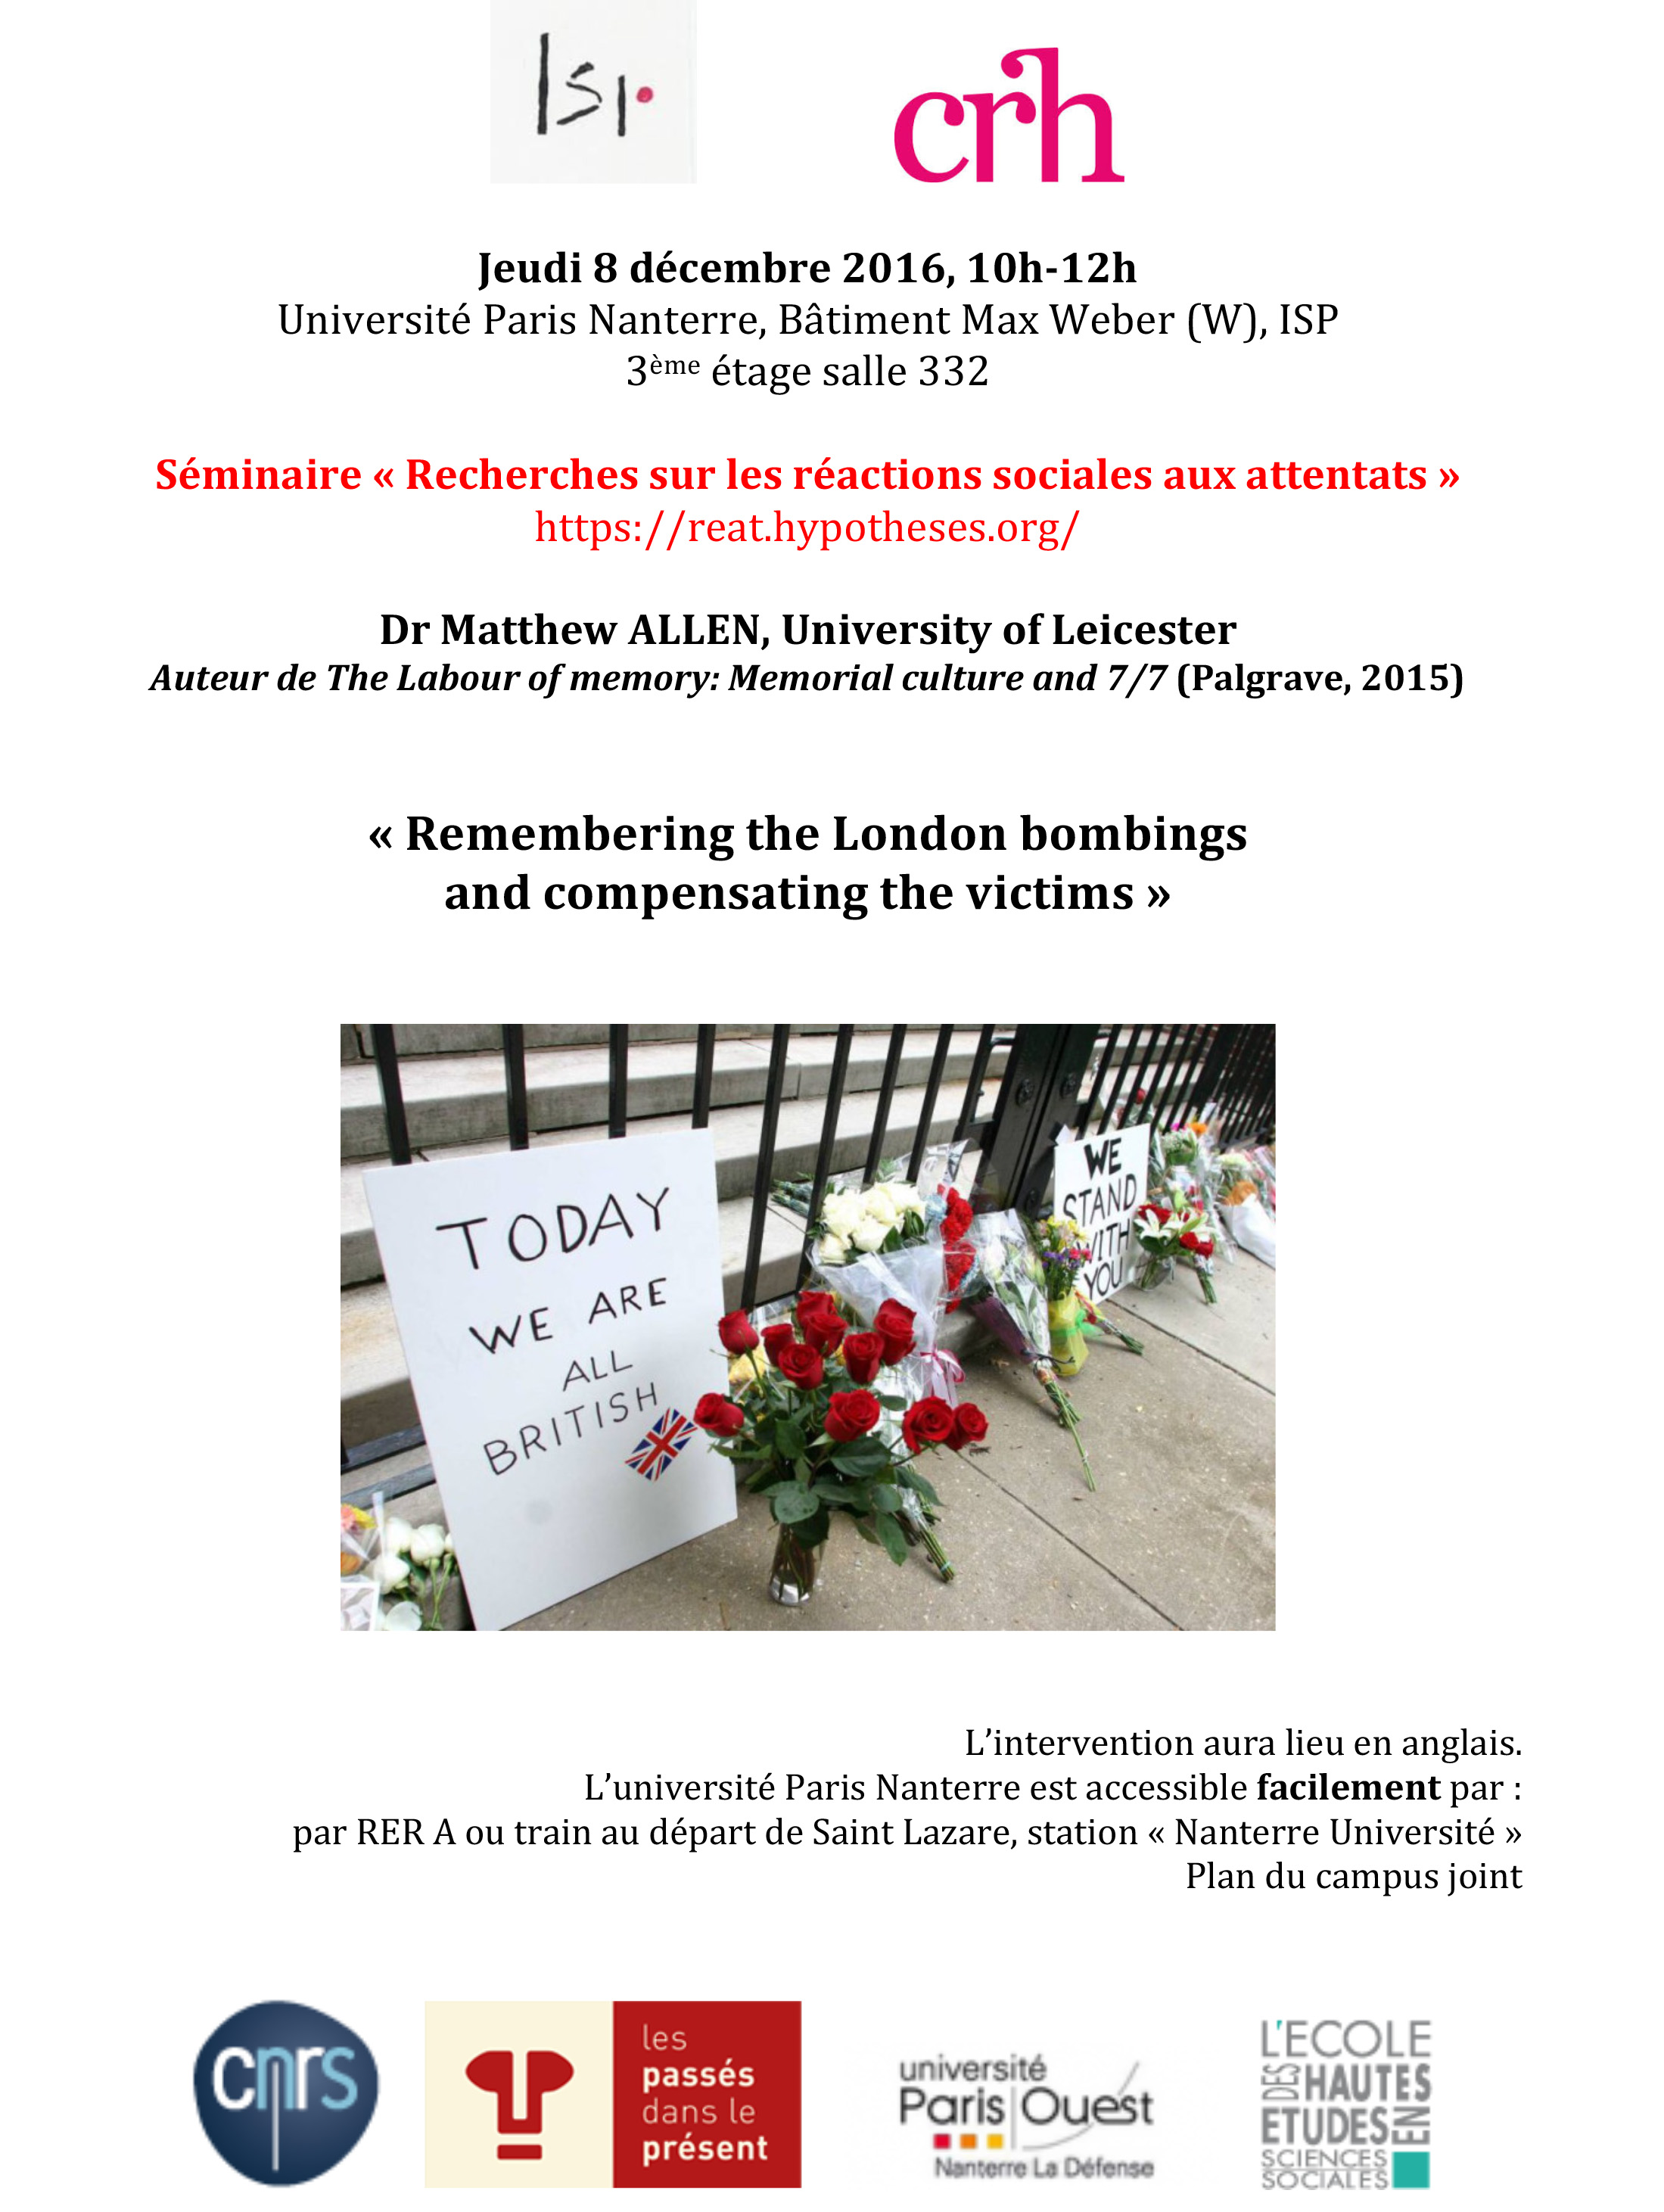 Remembering the London bombings and compensating the victims